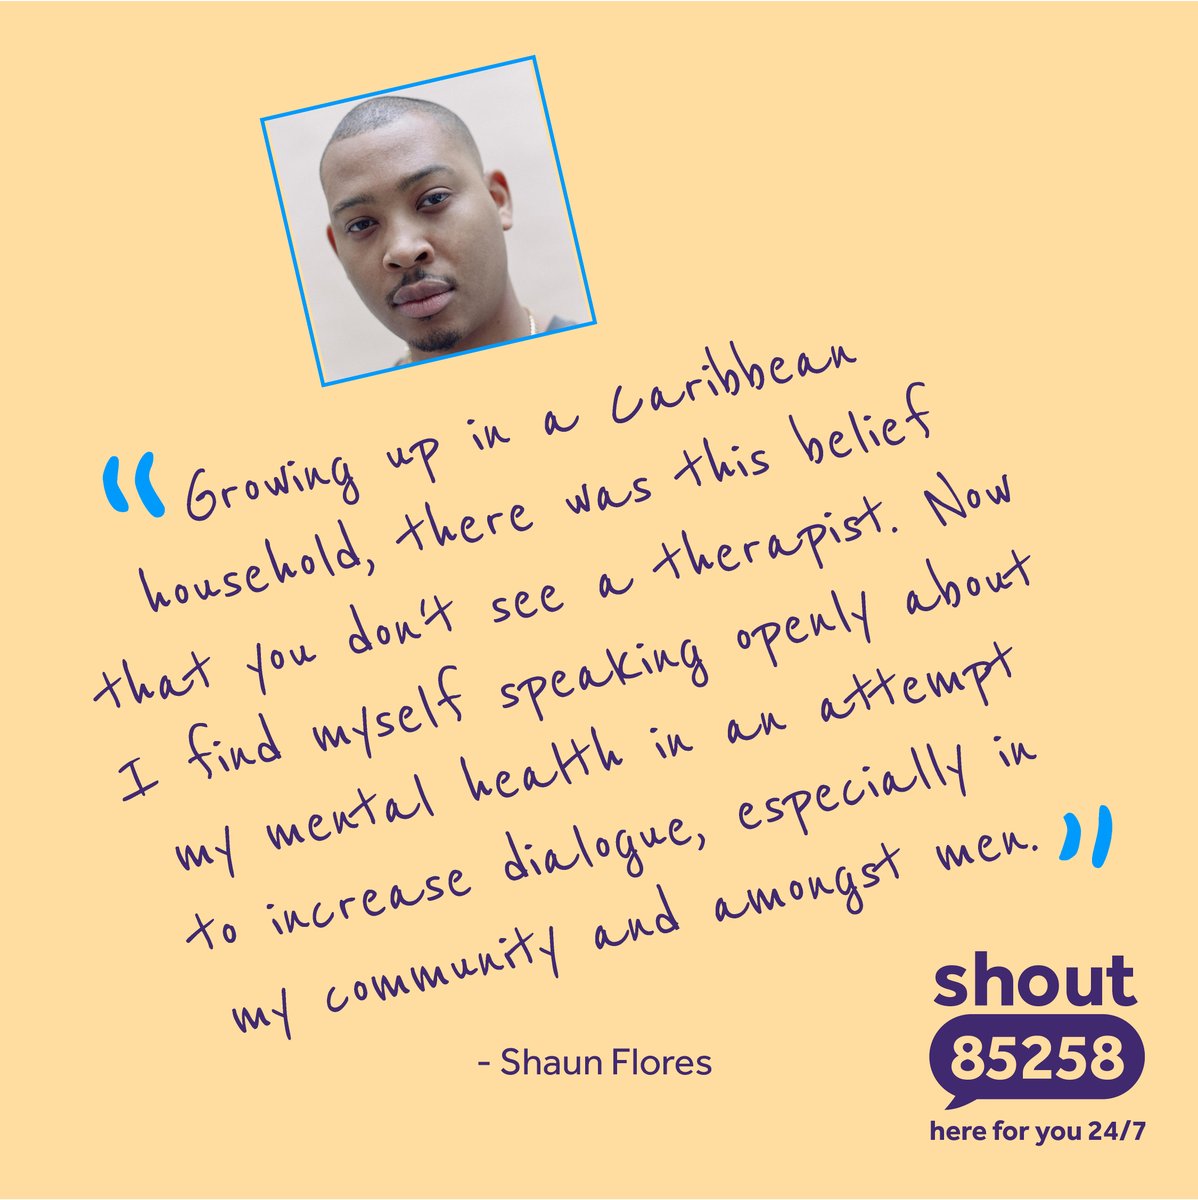 This #OCDAwarenessWeek, @theshaunflores a 28-year-old actor, model, podcaster, journalist and public speaker who lives with OCD, shares his top tips for self-care based on what has worked best for him. For more support with OCD, follow @ocdaction and @OCDUKcharity